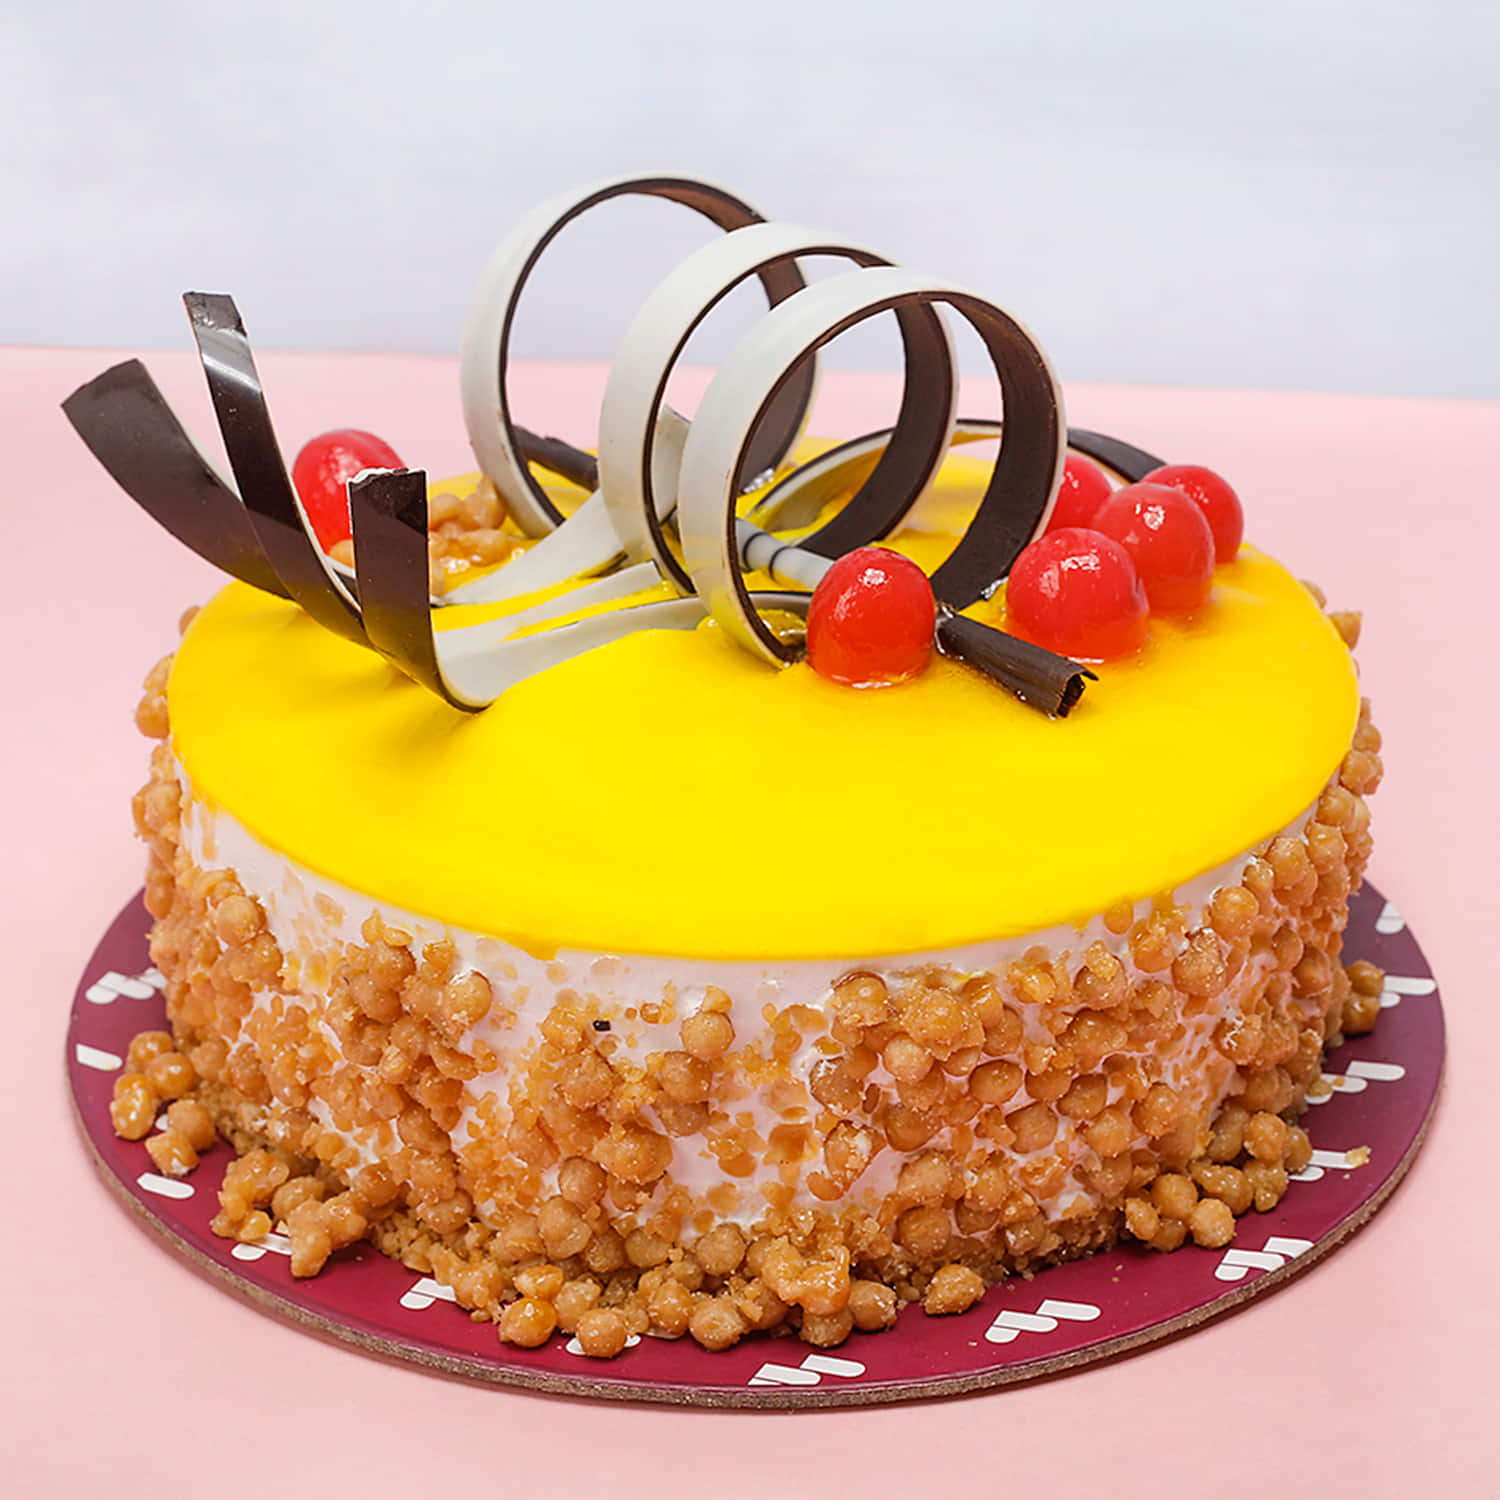 Eggless Butterscotch Cake at Best Price in Delhi | Archies Limited